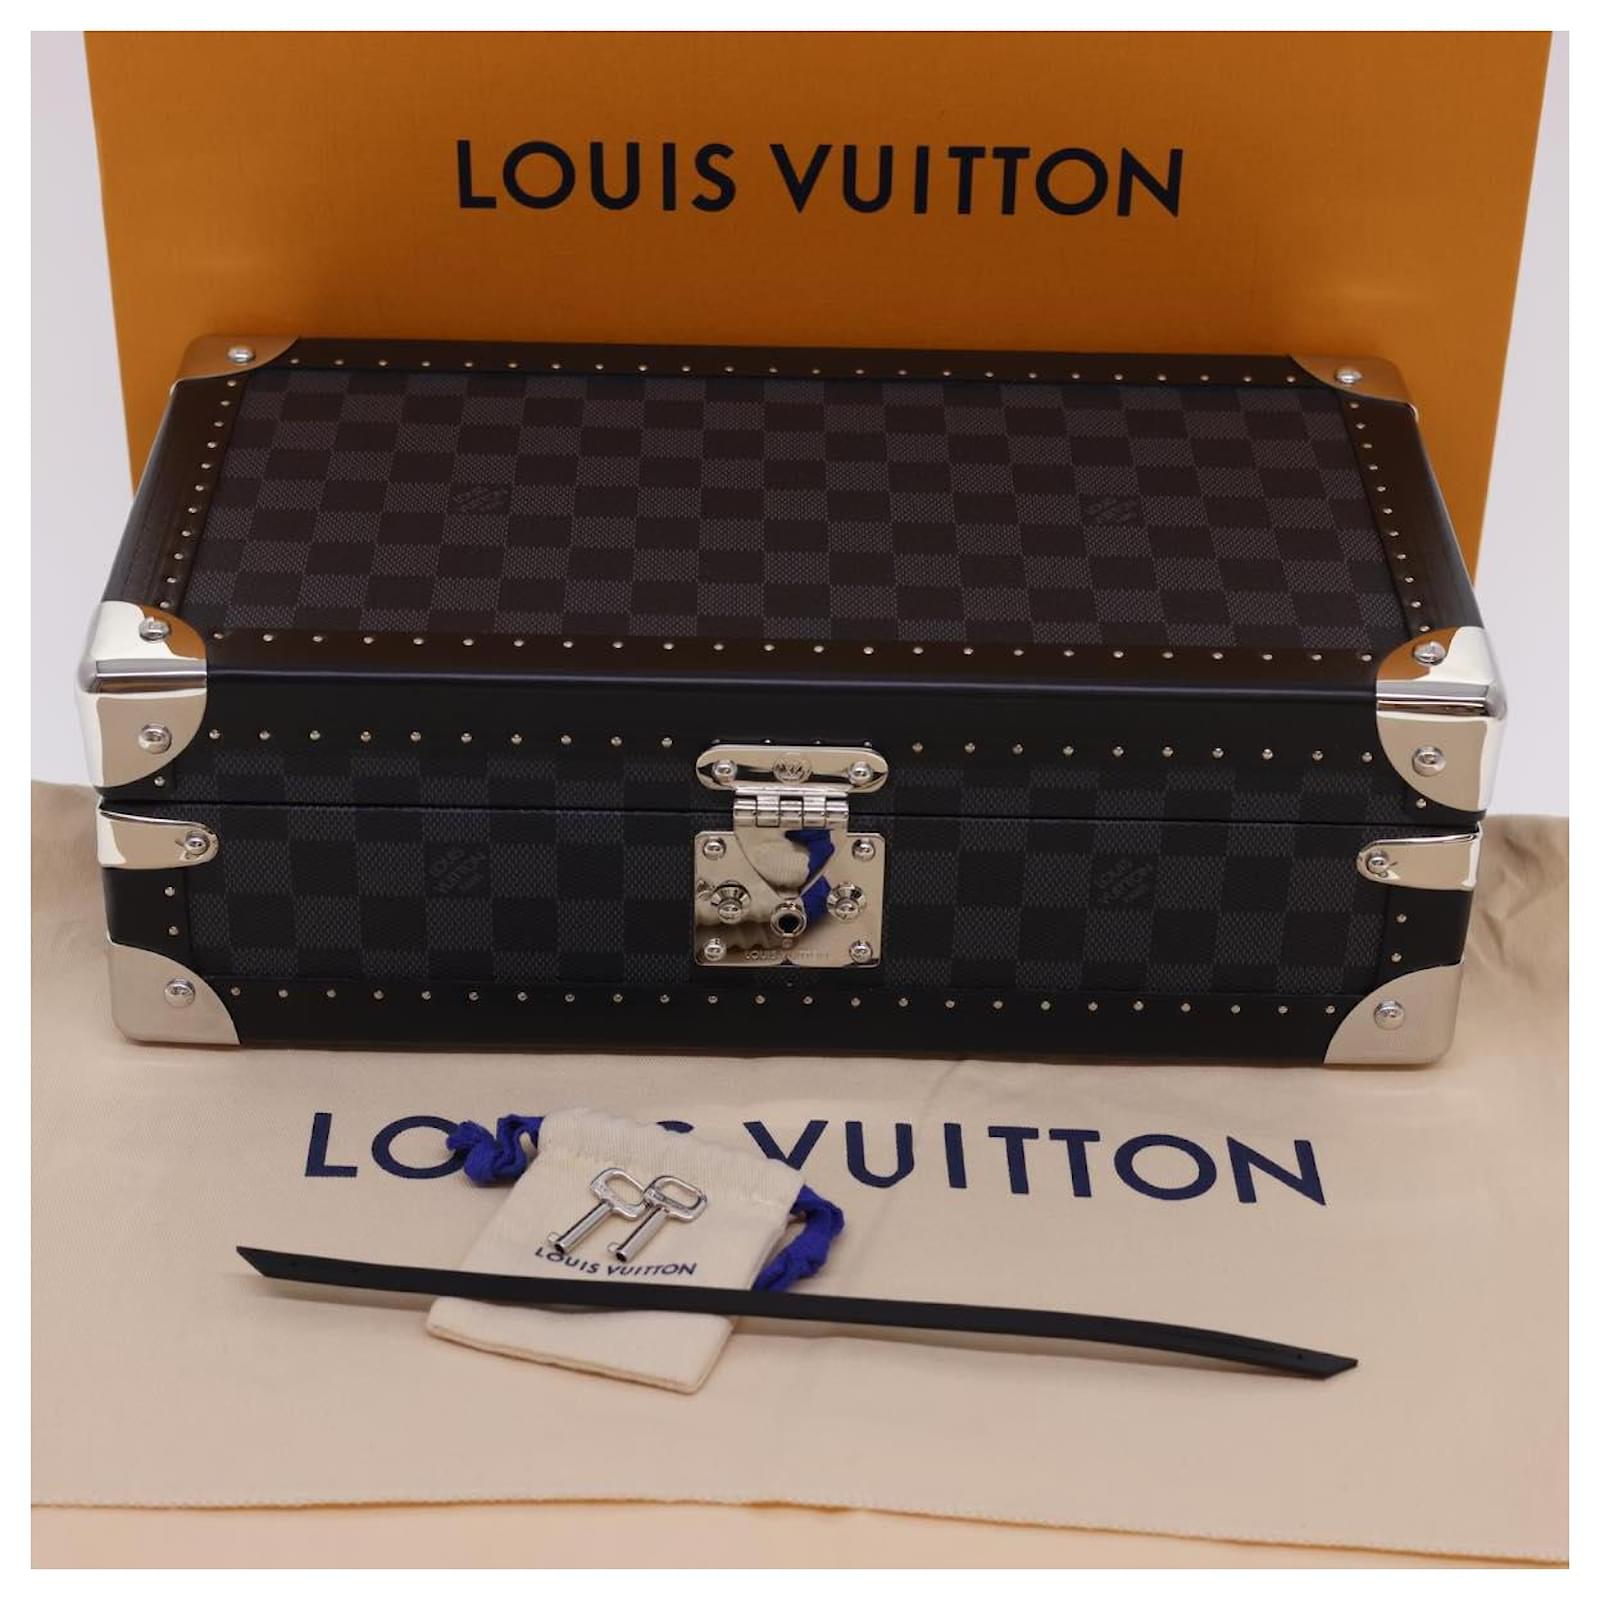 Louis Vuitton Damier Graphite Coffret 8 Montres Case Trunk for €5 900 for  sale from a Private Seller on Chrono24